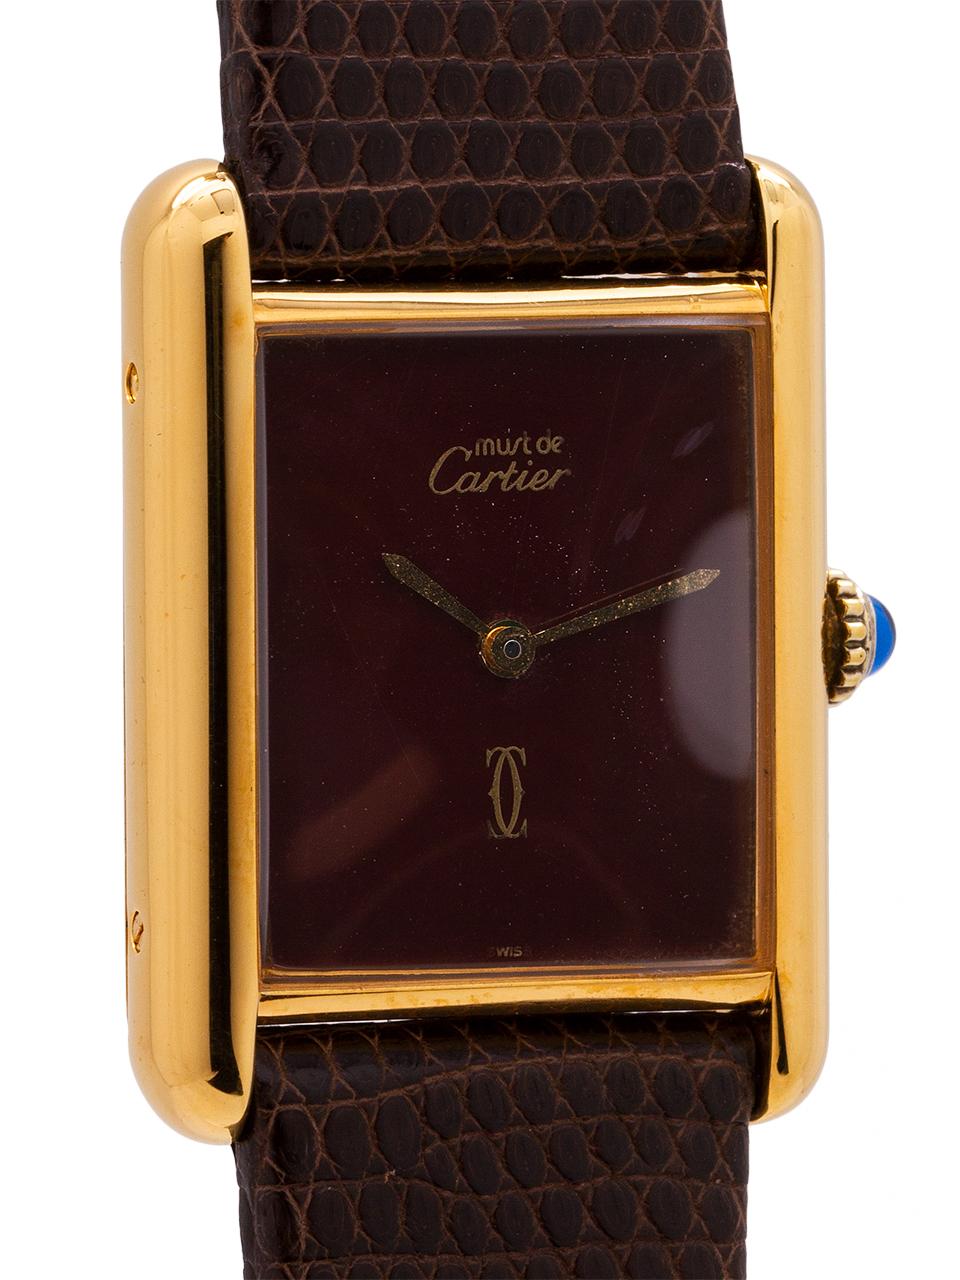 
Cartier lady’s vermeil Tank Louis circa 1980s. Featuring a 23 X 31mm case secured by 4 side screws. Featuring original burgundy color dial signed Must de Cartier and with Cartier double C logo, gilt hands, and blue cabochon sapphire crown. Powered